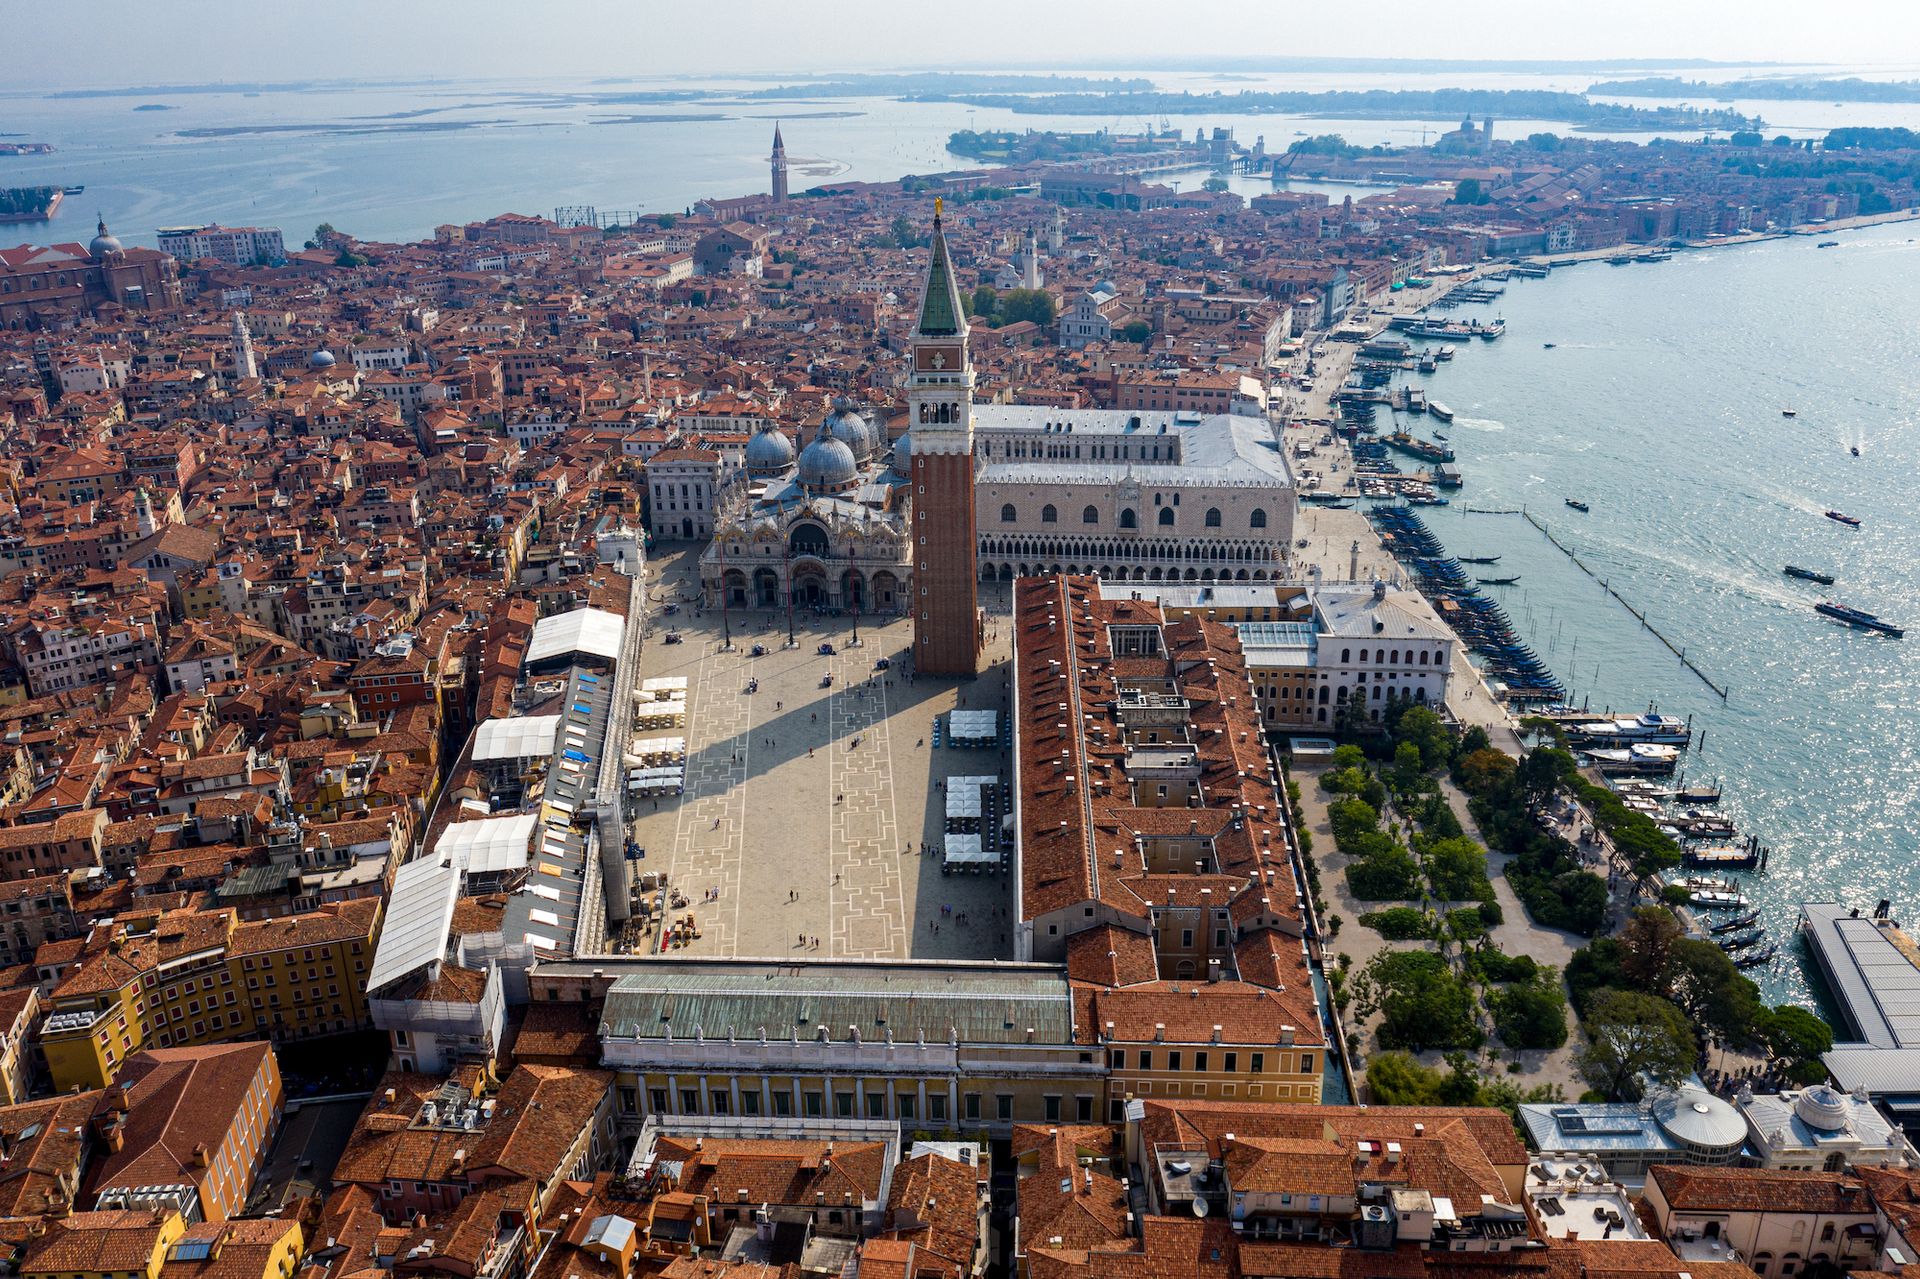 Aerial view of Venice, where the Republic of Benin will stage its first Venice Biennale pavilion in 2024 Photo by Kasa Fue, via Wikimedia Commons